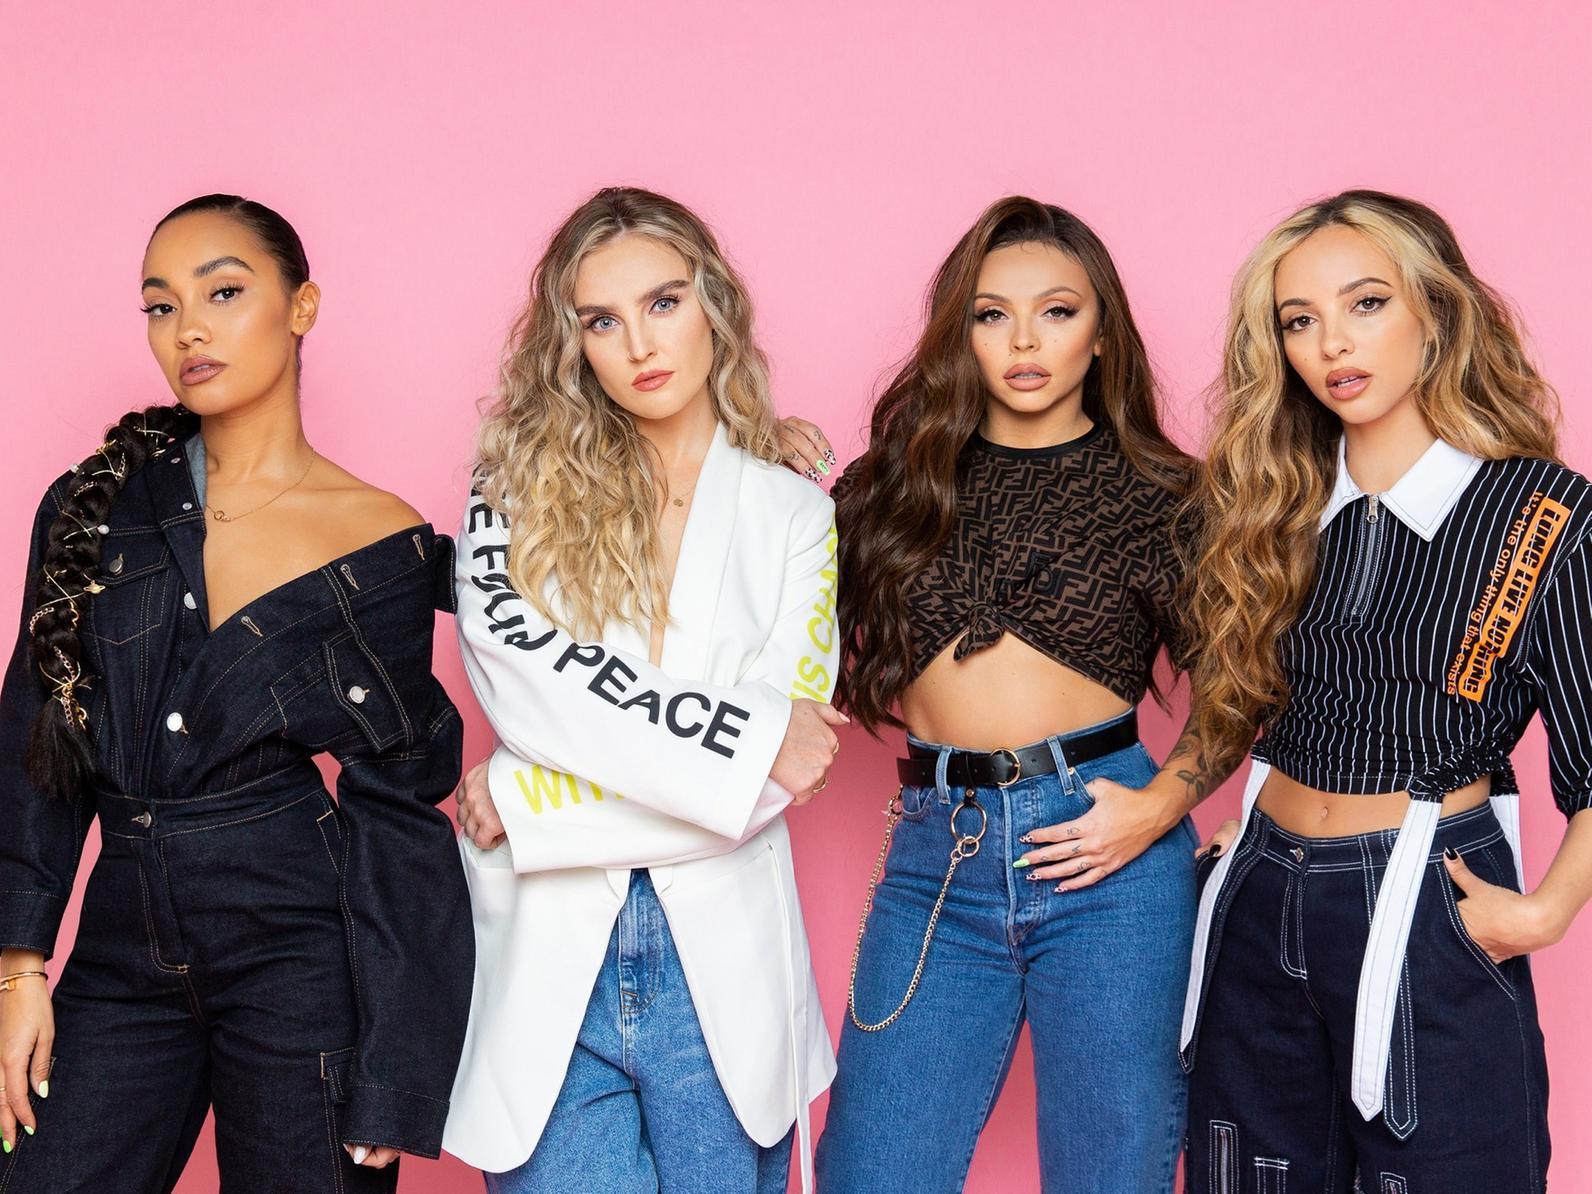 Global sensation Little Mix returns to the Open Air Theatre on July 21.